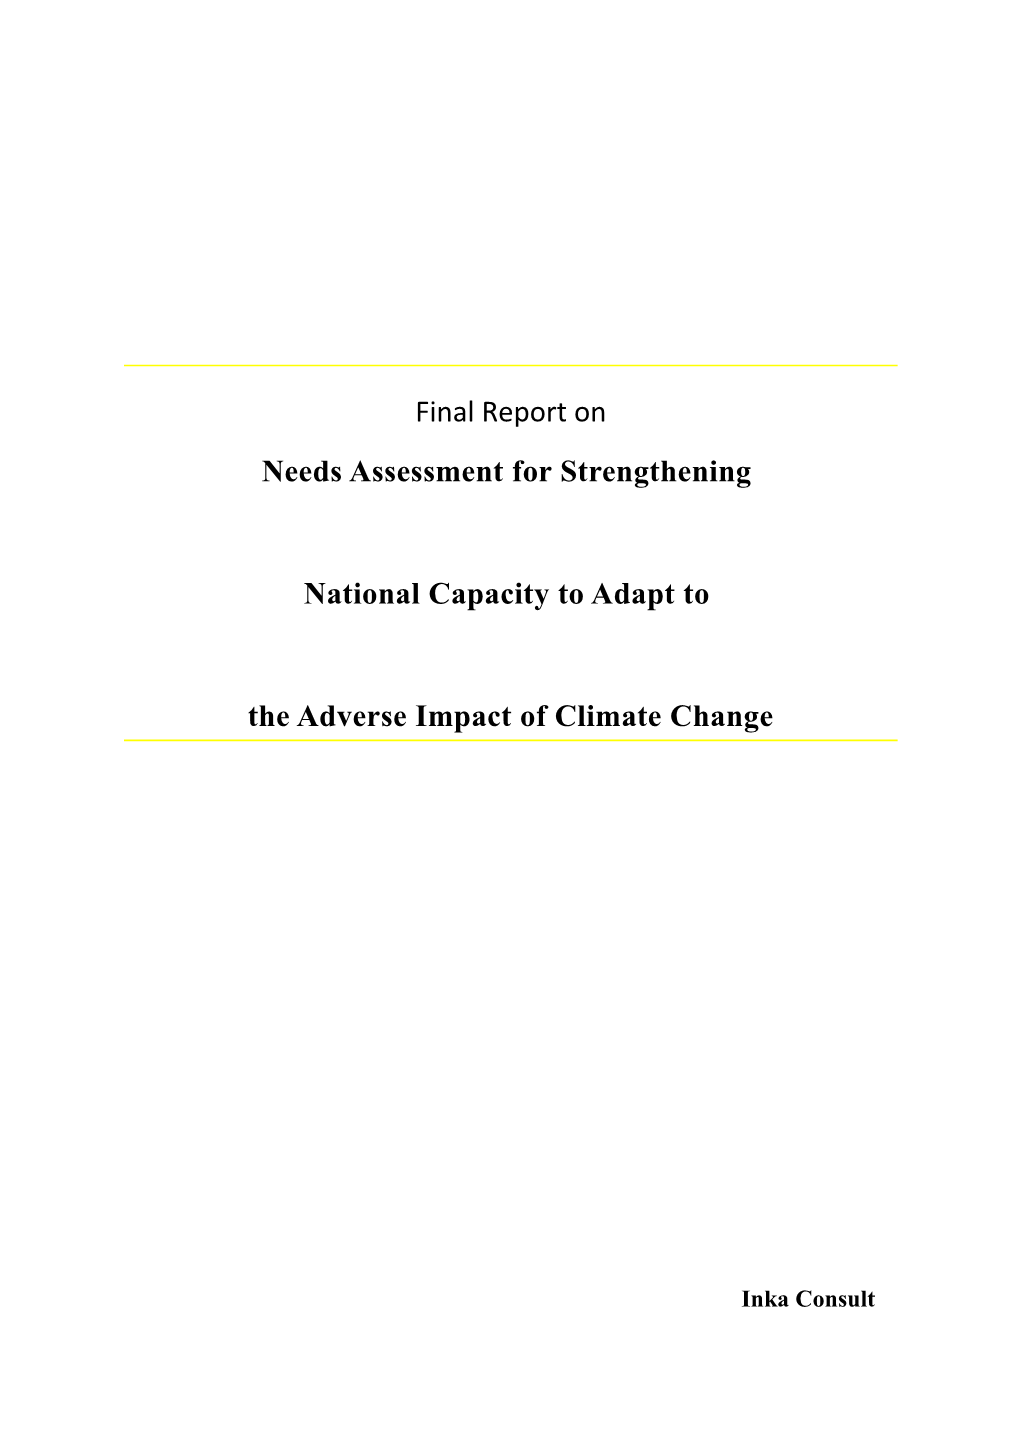 Debriefing Note for Needs Assessment for Strengthening National Capacity to Adapt to The